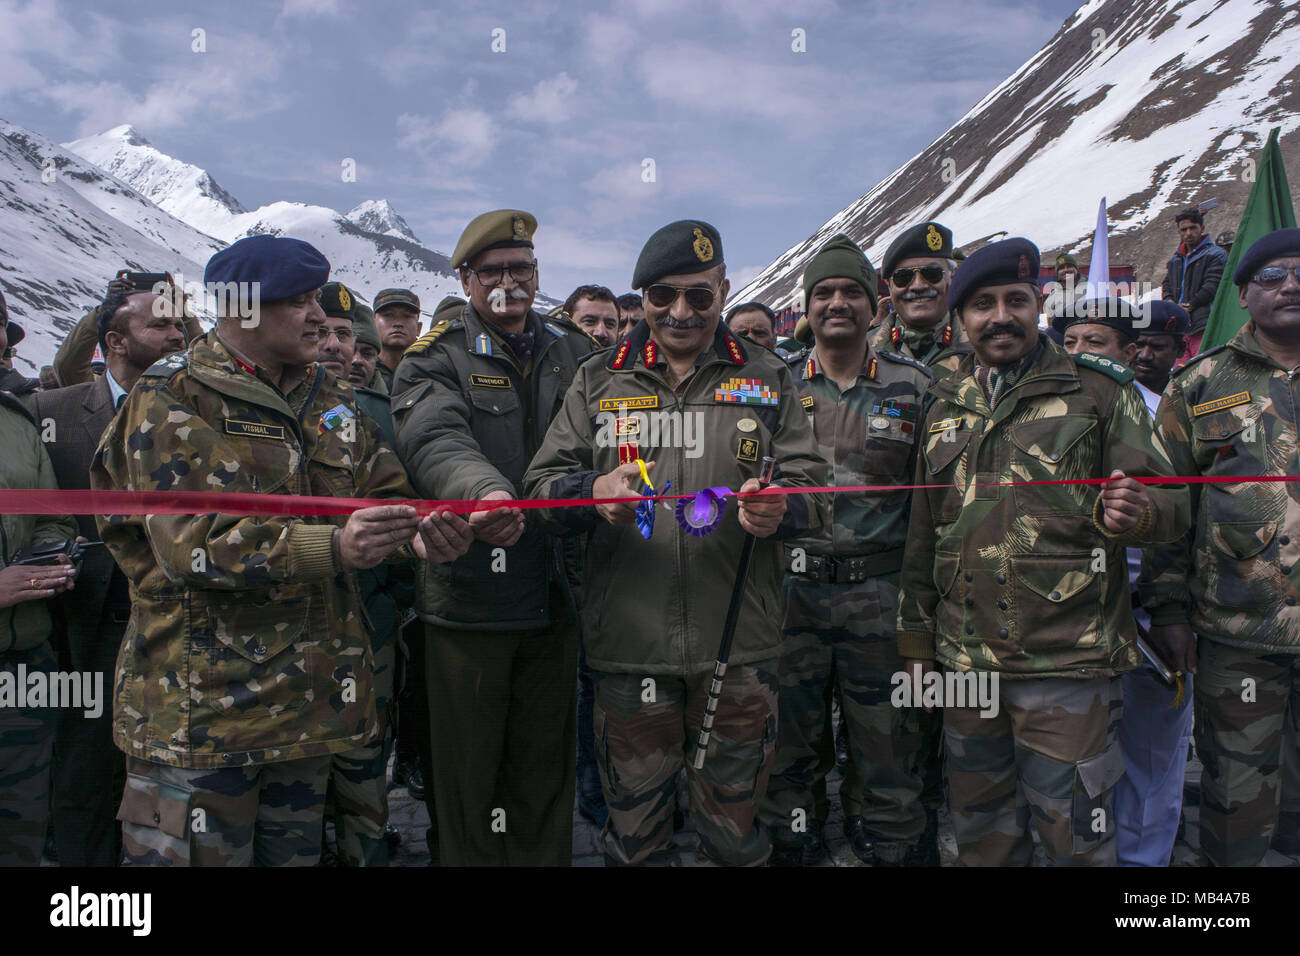 zojila-jammu-and-kashmir-india-6th-apr-2018-indian-army-officials-attending-the-opening-ceremony-of-the-snow-cleared-srinagar-leh-highway-in-zojila-108-km-far-from-srinagar-the-summer-capital-of-indian-administered-kashmir-indiathe-275-miles-long-srinagar-leh-highway-was-opened-for-vehicles-by-indian-bro-border-roads-organization-after-it-has-been-closed-for-the-past-six-months-due-to-snow-credit-masrat-zahrasopa-imageszuma-wirealamy-live-news-MB4A7B.jpg